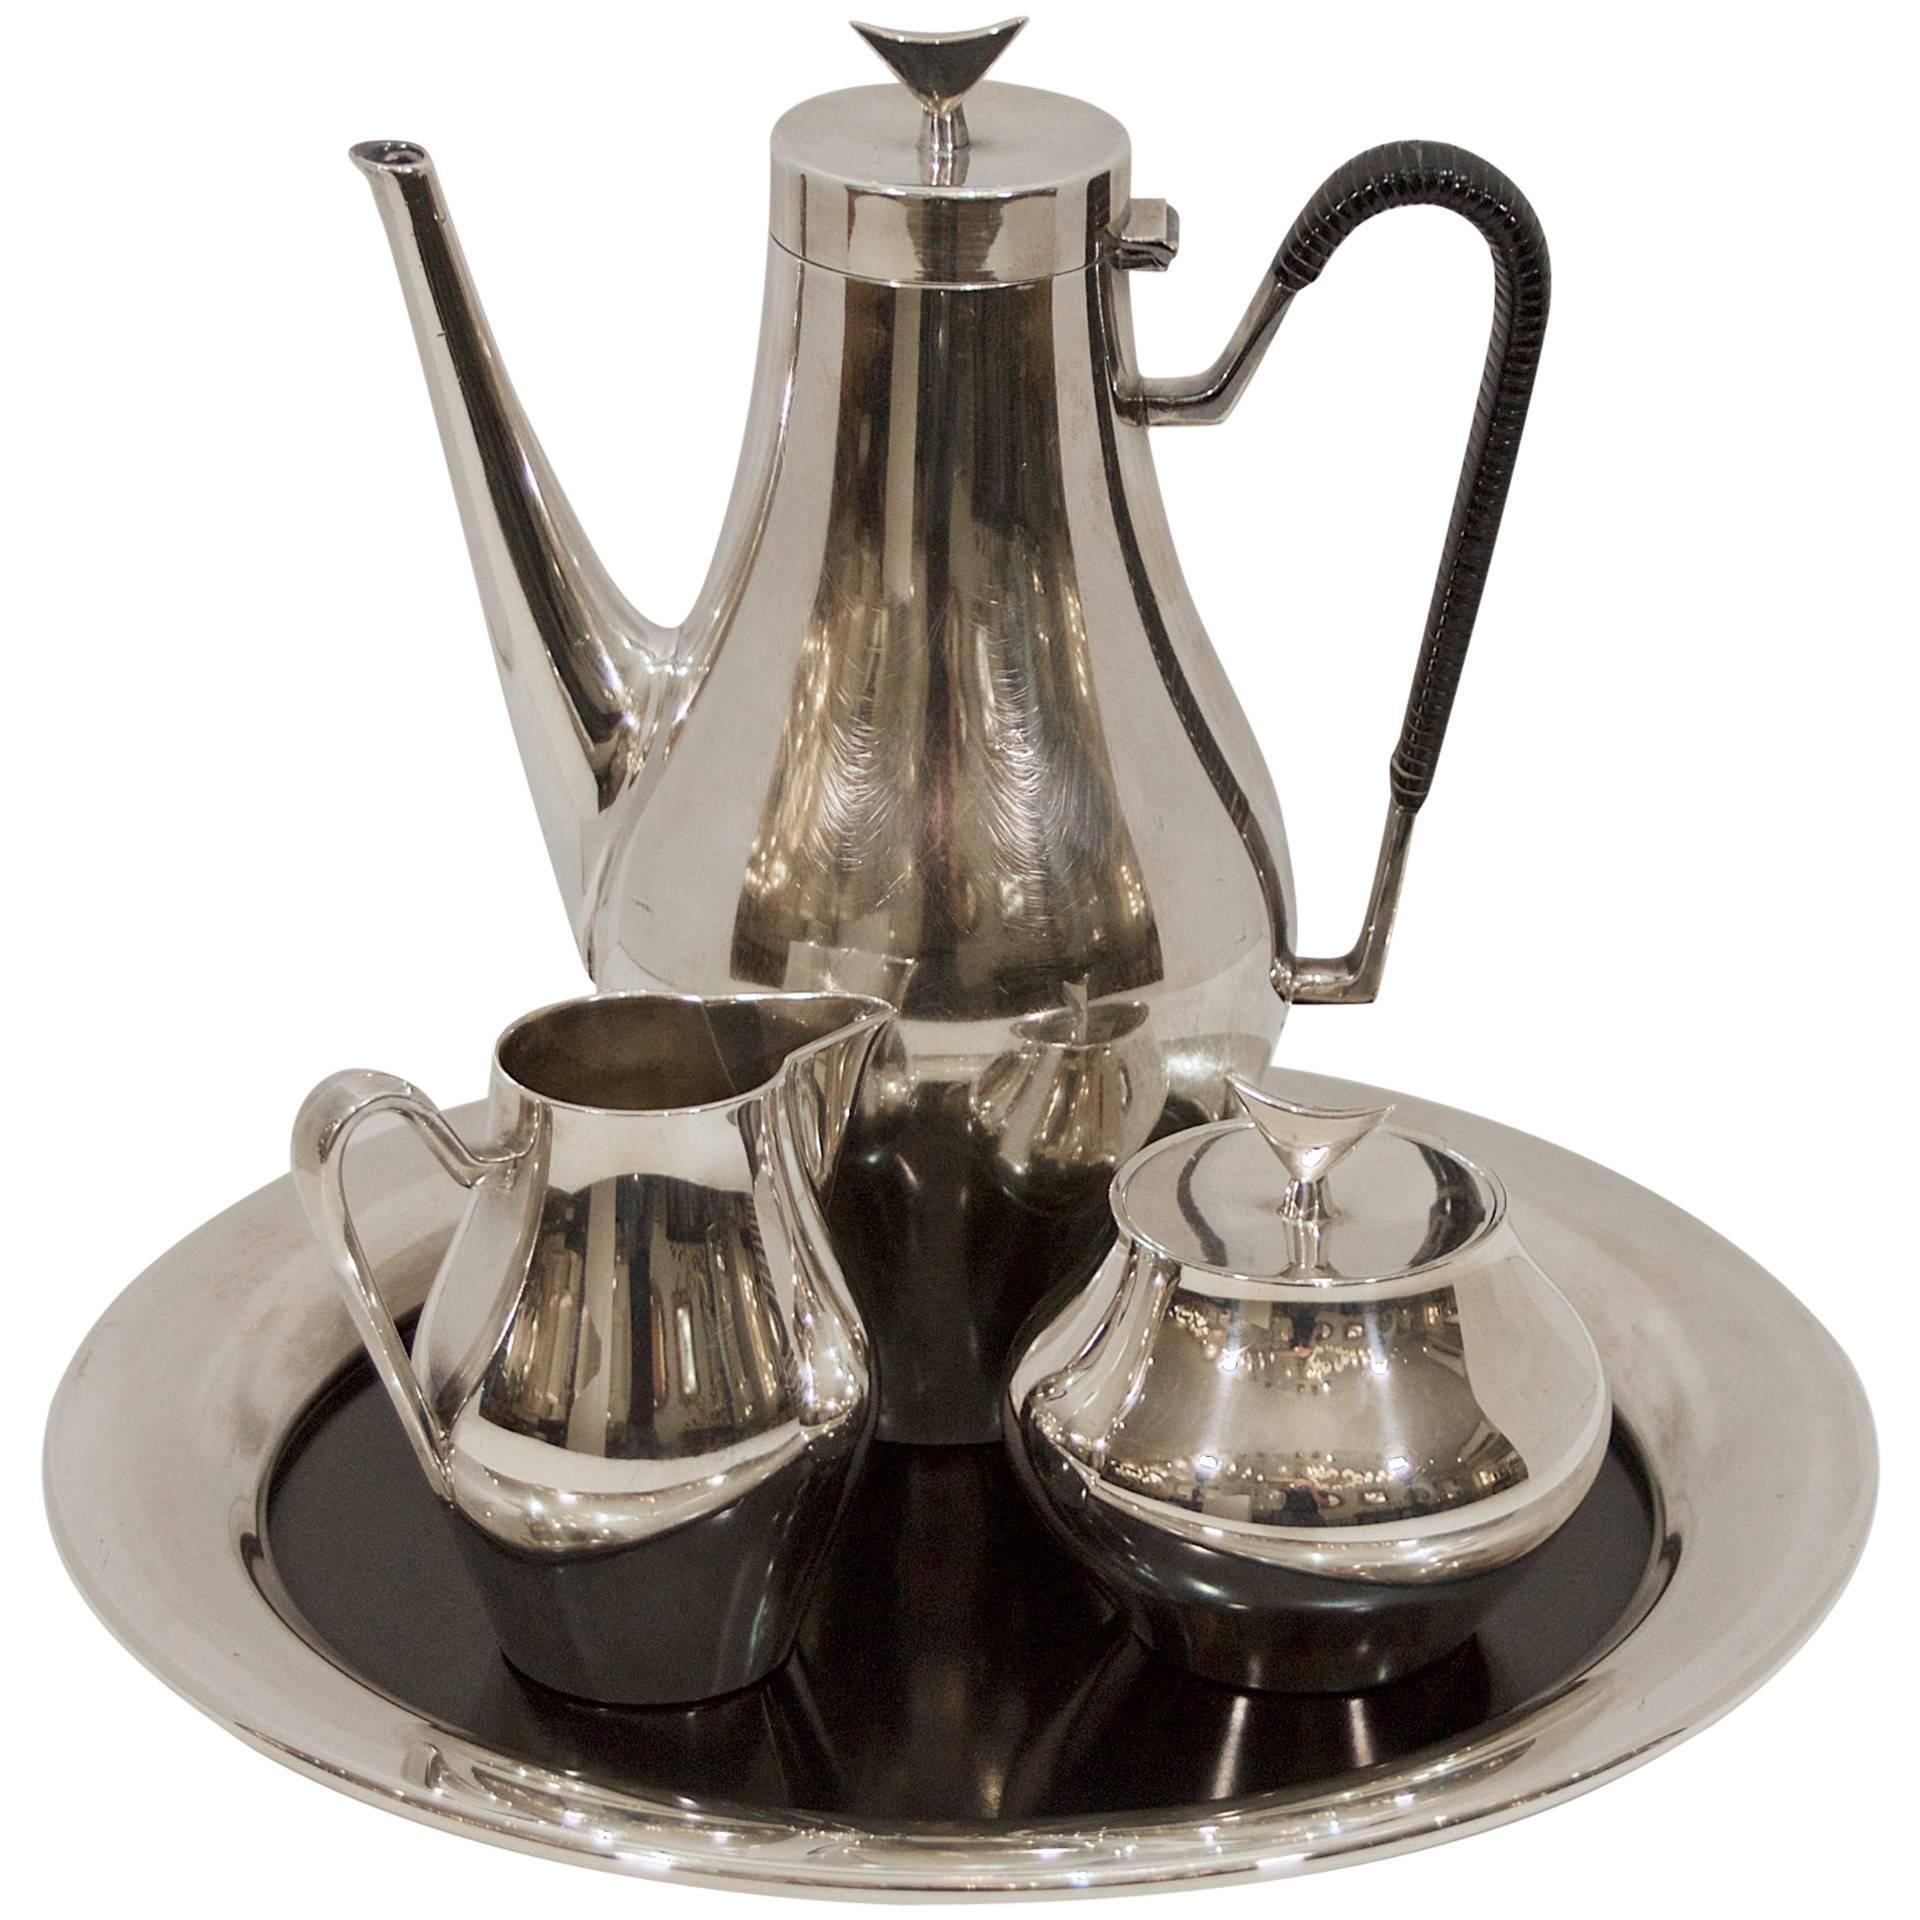 Reed & Barton "Denmark" Coffee Service with Tray For Sale